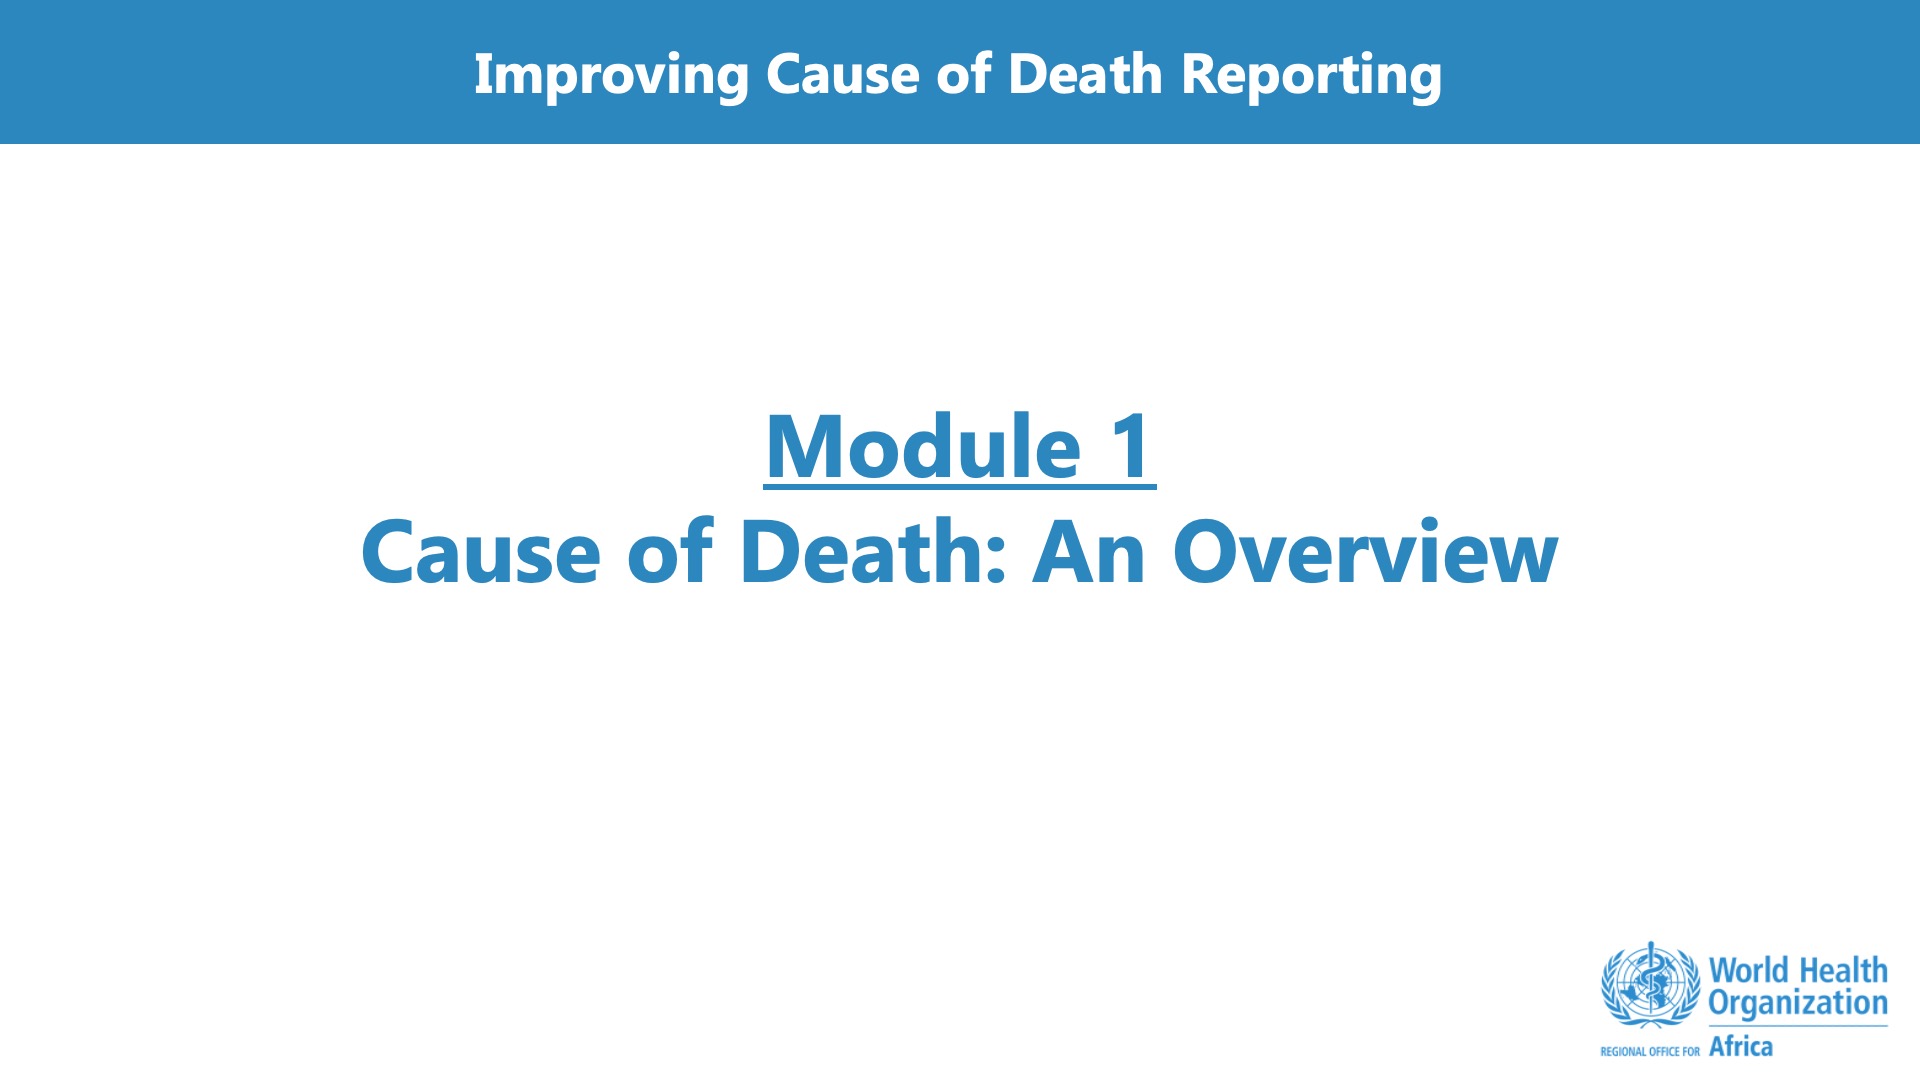 Module 1 - Overview of the cause of death